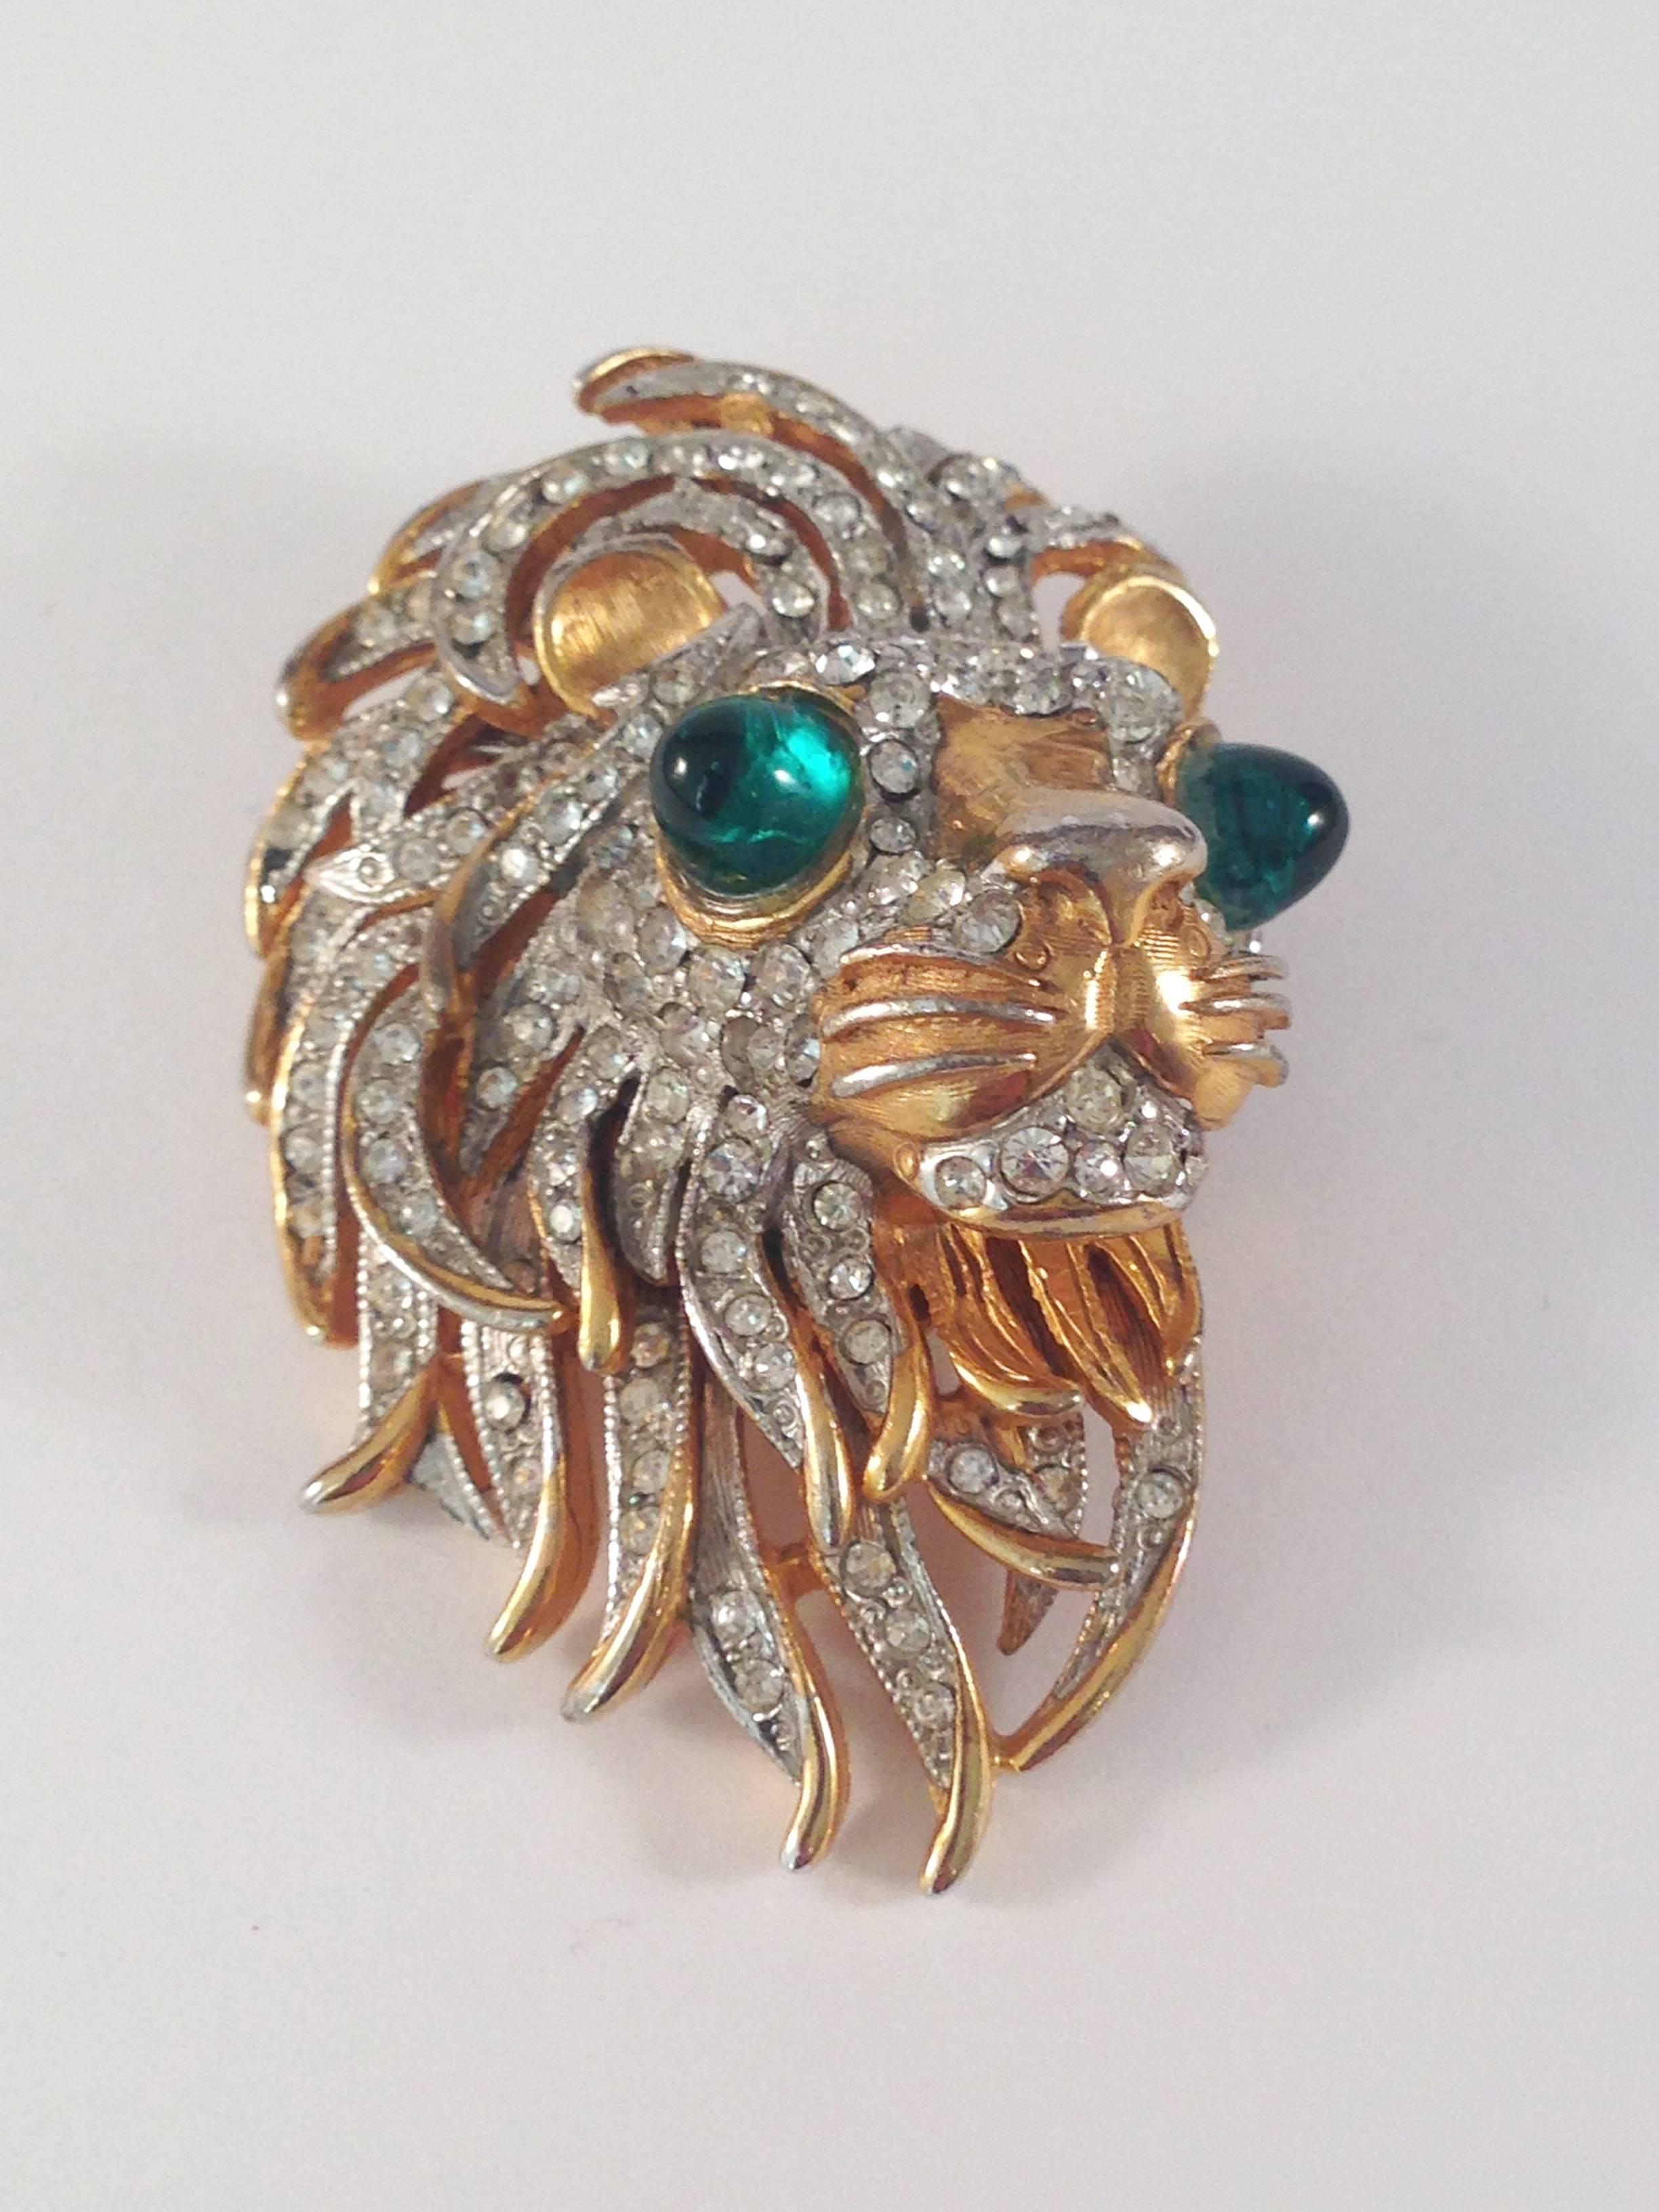 This is a beautifully made 1960s Kenneth Jay Lane brooch of a lion's head. It is gold-tone metal with clear rhinestones set into the mane and face and green glass eyes. It is marked 'K.J.L.' on the back - the signature Lane used in the 1960s. It is